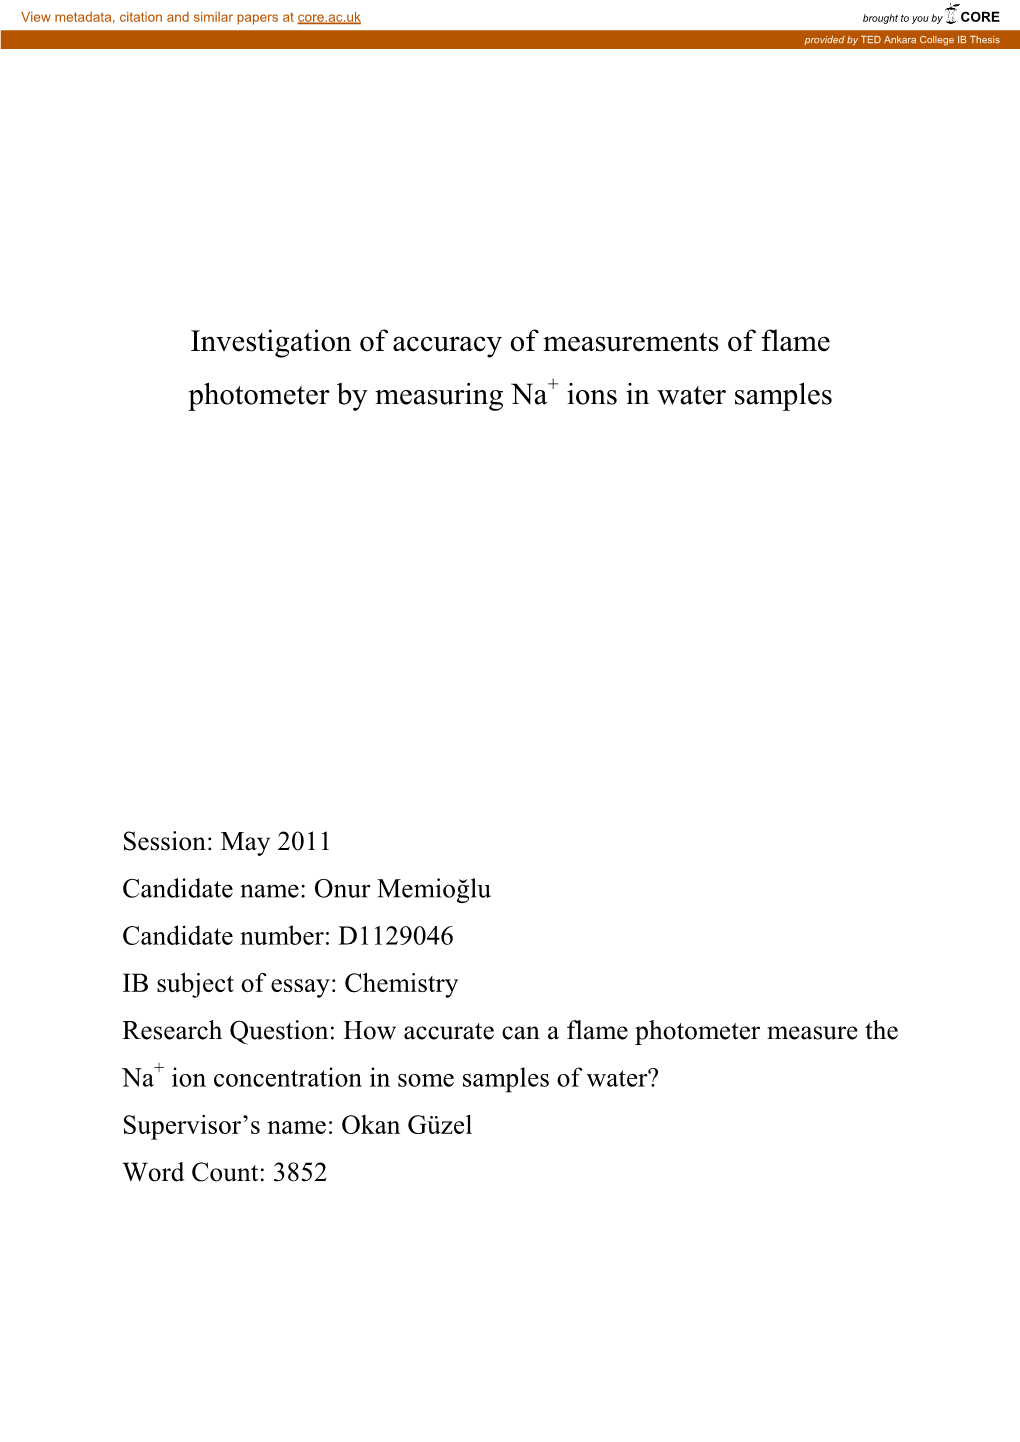 Investigation of Accuracy of Measurements of Flame Photometer by Measuring Na+ Ions in Water Samples